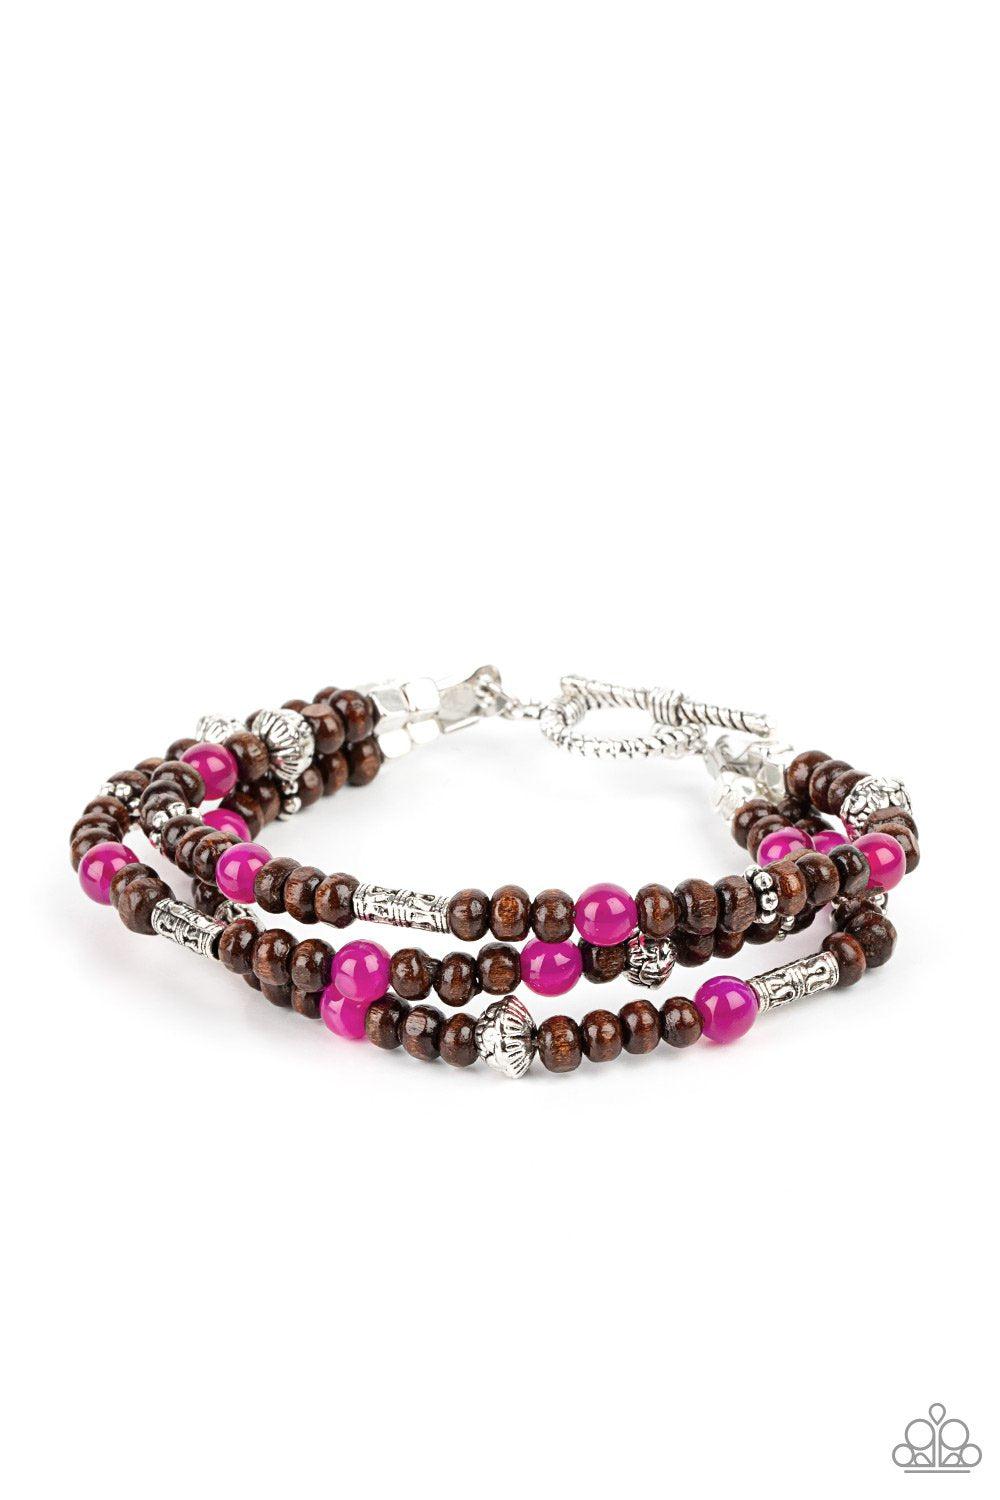 Woodsy Walkabout Pink Stone and Brown Wood Toggle Bracelet - Paparazzi Accessories- lightbox - CarasShop.com - $5 Jewelry by Cara Jewels